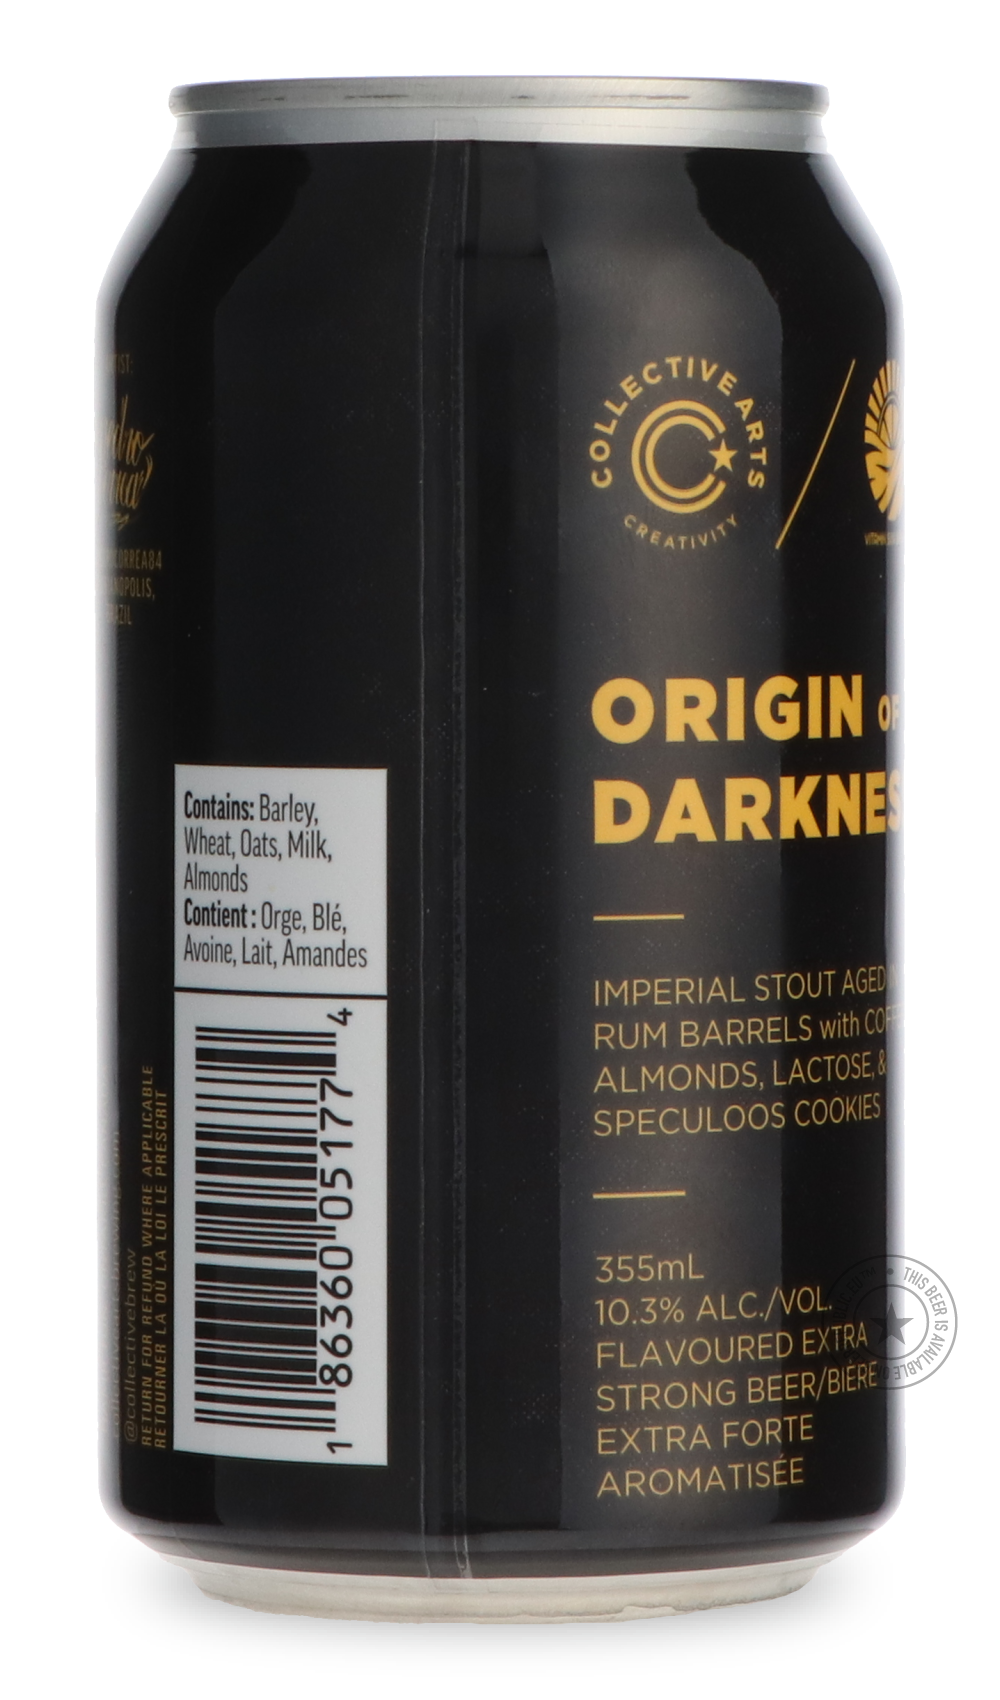 -Collective Arts- Origin of Darkness Chocolate and Coffee Flavors / Vitamin Sea-Stout & Porter- Only @ Beer Republic - The best online beer store for American & Canadian craft beer - Buy beer online from the USA and Canada - Bier online kopen - Amerikaans bier kopen - Craft beer store - Craft beer kopen - Amerikanisch bier kaufen - Bier online kaufen - Acheter biere online - IPA - Stout - Porter - New England IPA - Hazy IPA - Imperial Stout - Barrel Aged - Barrel Aged Imperial Stout - Brown - Dark beer - Bl